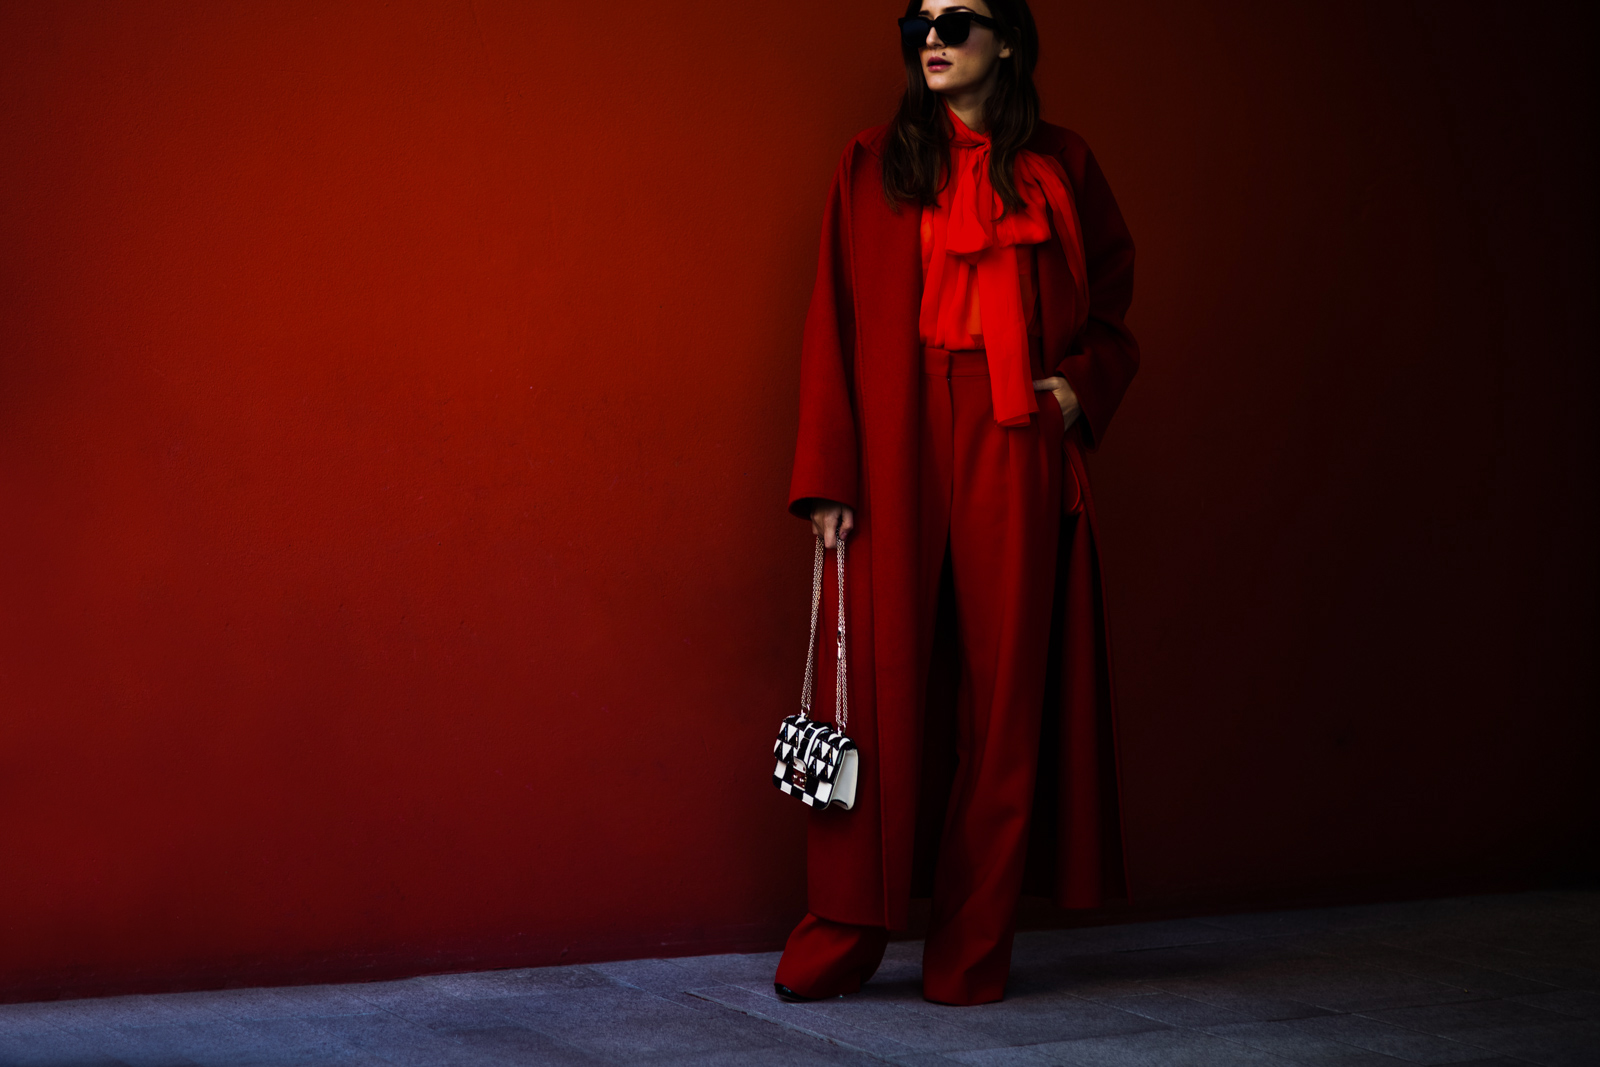 Eleonora Carisi wearing a total red outfit before the Emporio Armani Fashion show in Milan, Italy